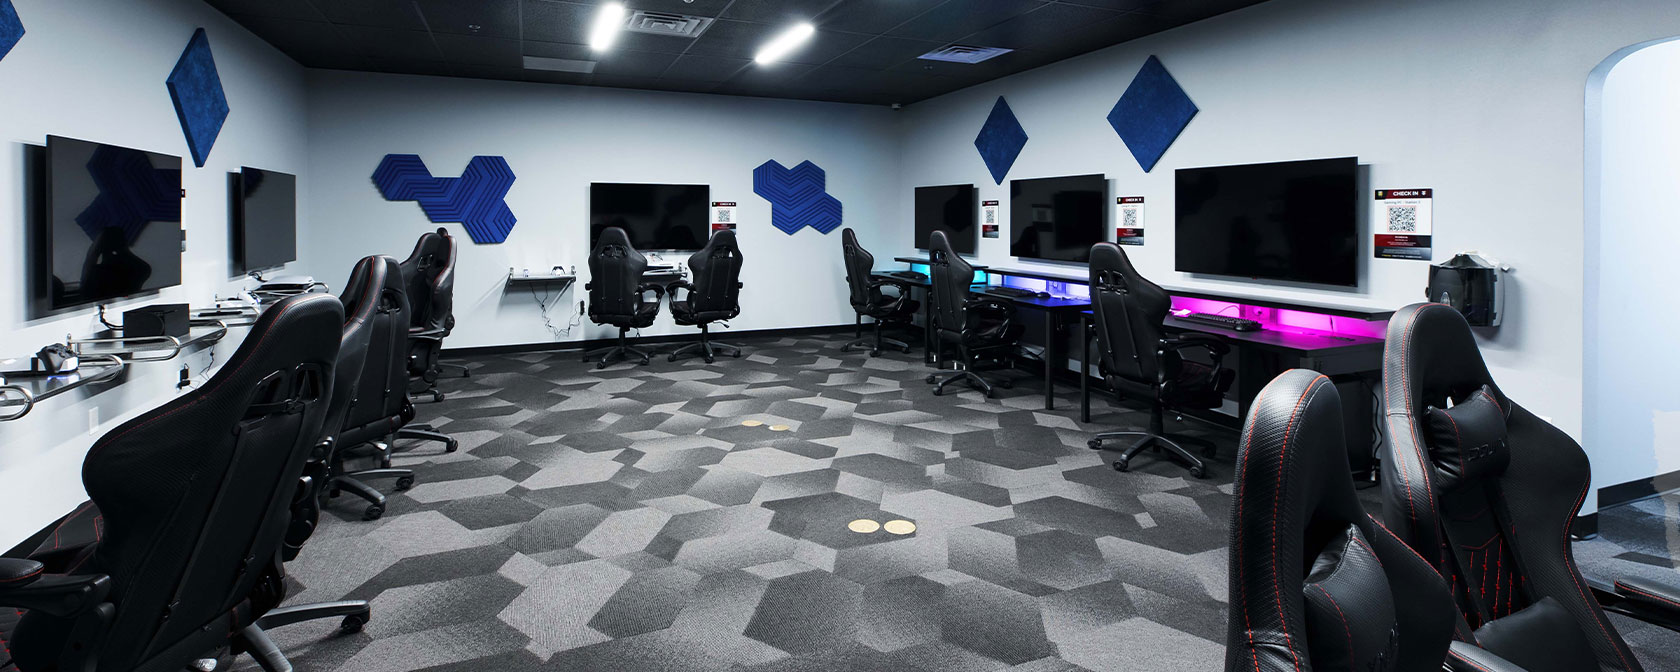 The campus eSports Lounge provides various gaming consoles and PCs for student use.